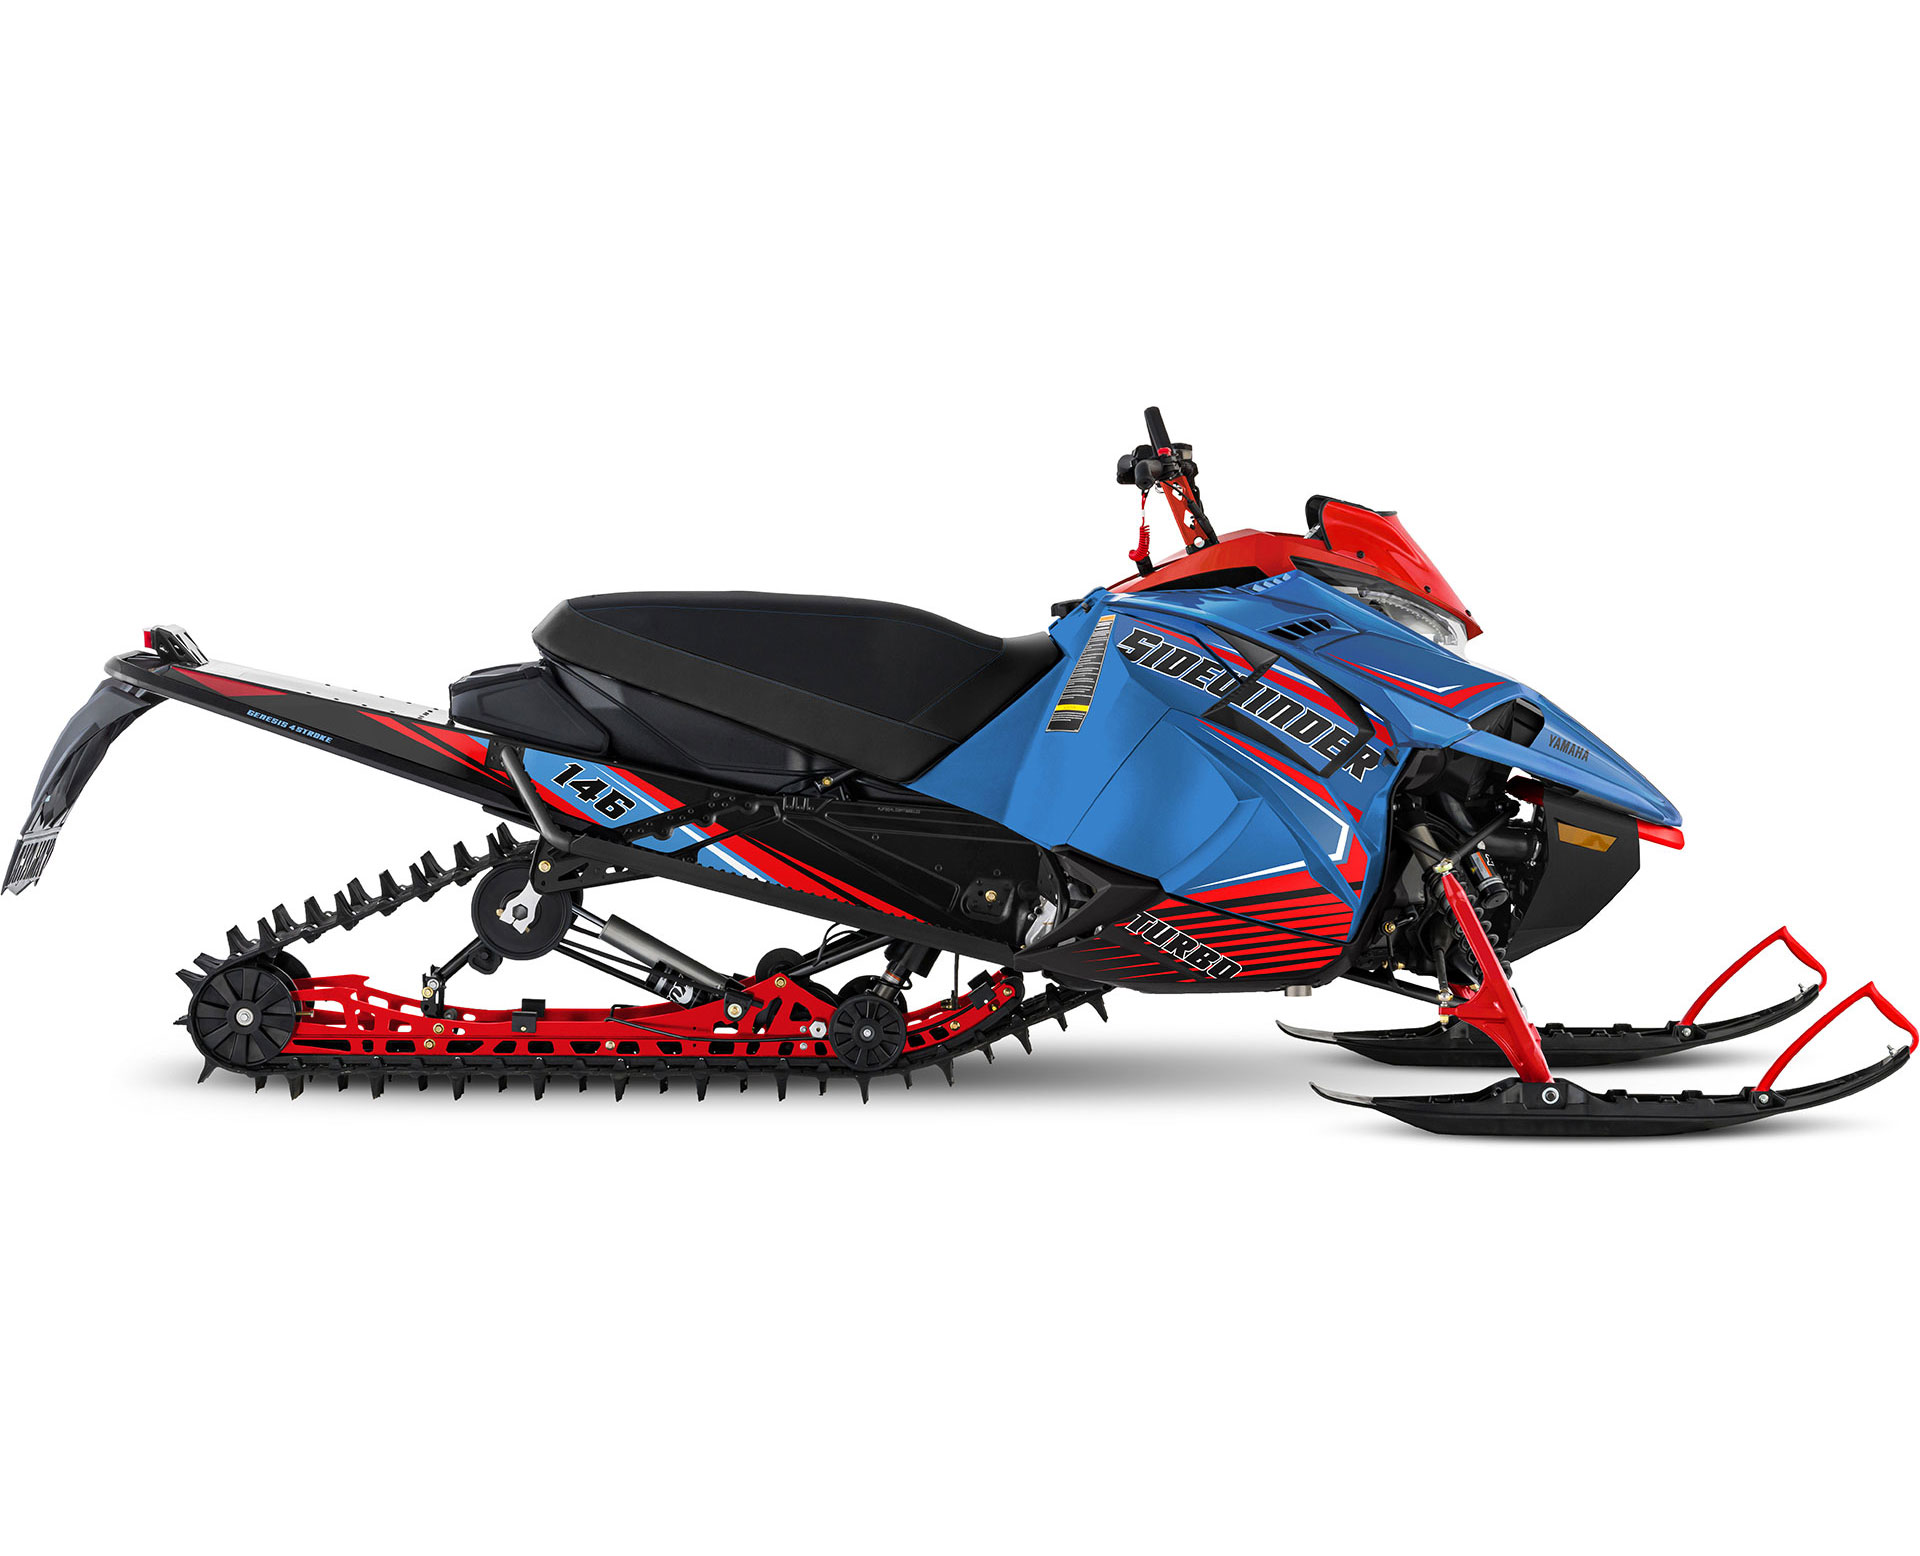 Thumbnail of your customized 2024 Sidewinder X-TX SE